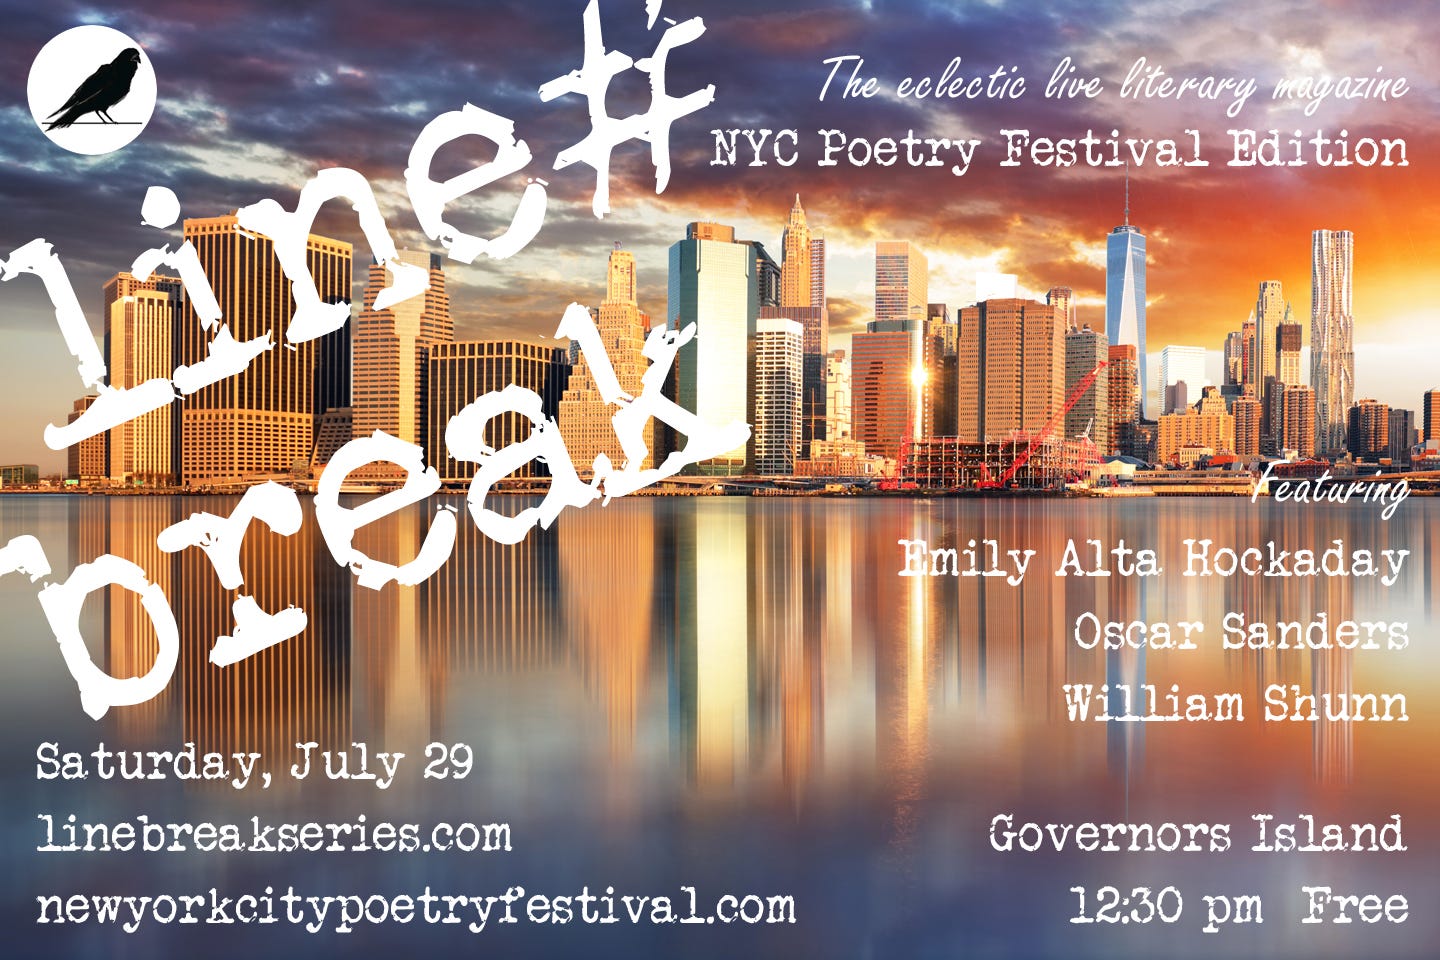 Postcard advertising the Line Break Reading Series event at the New York City Poetry Festival on Governors Island, Saturday, July 29, 2017, featuring Emily Alta Hockaday, Oscar Sanders, and William Shunn. In the background is a photograph of lower Manhattan from out on the harbor near sunset, featuring gleaming water and skyscrapers.